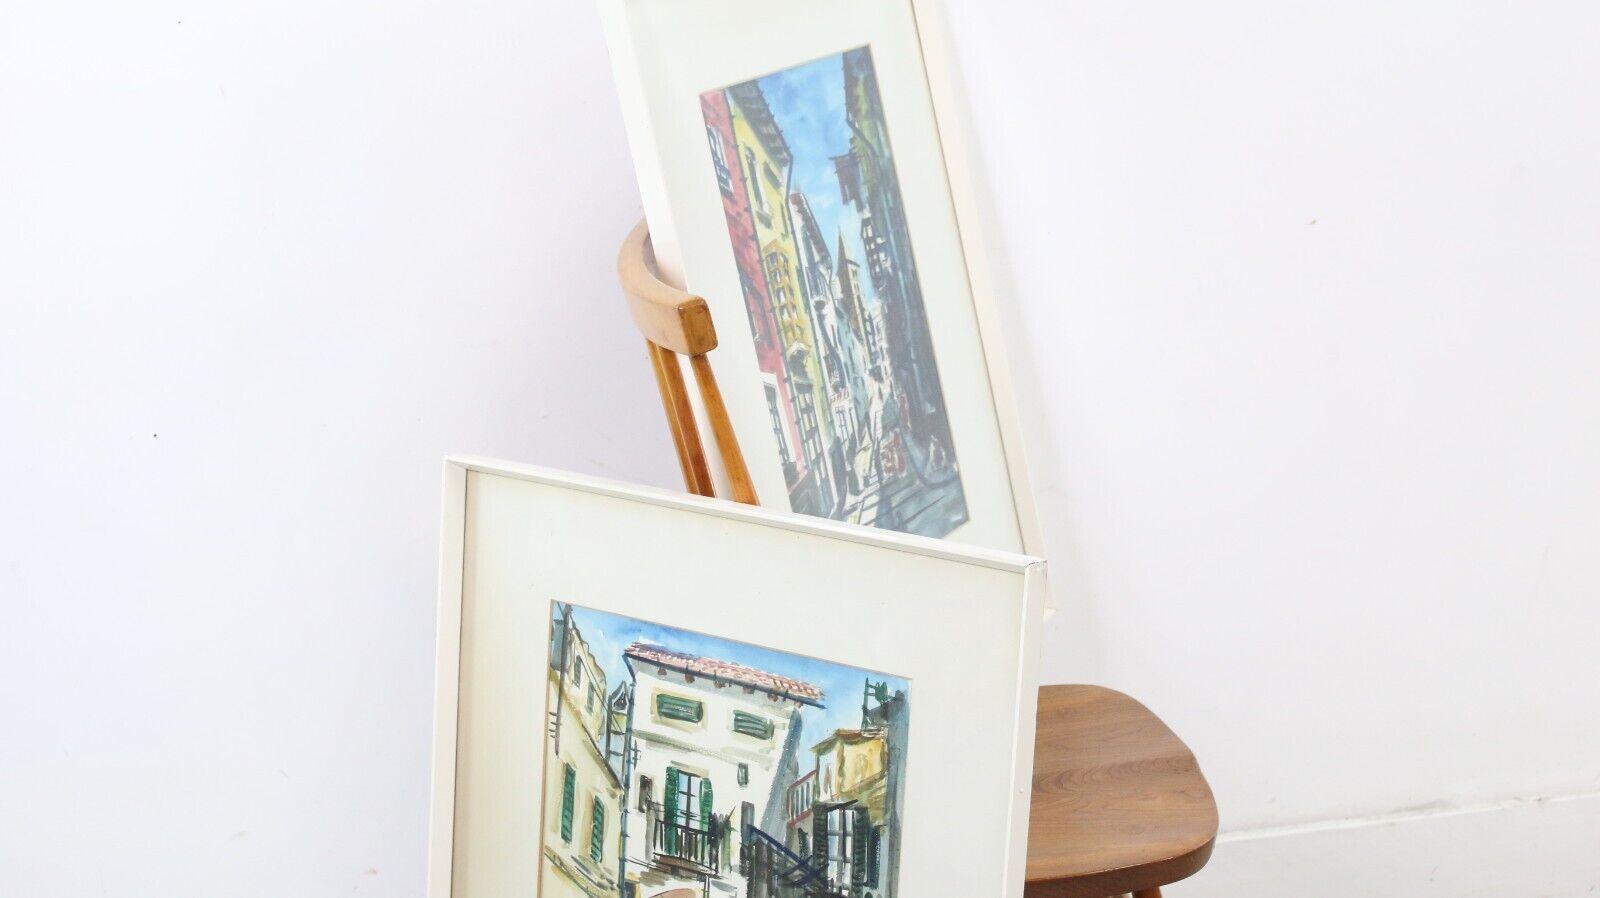 Mid Century Watercolour Painting

Two mid century 1960’s colourful framed original watercolours, one depicting a Spanish village street scene.

Signed by the artist.

Dimensions (cm): 

77H x 58W x 3D
73H x 52W x 3D

Some light wear to the wooden